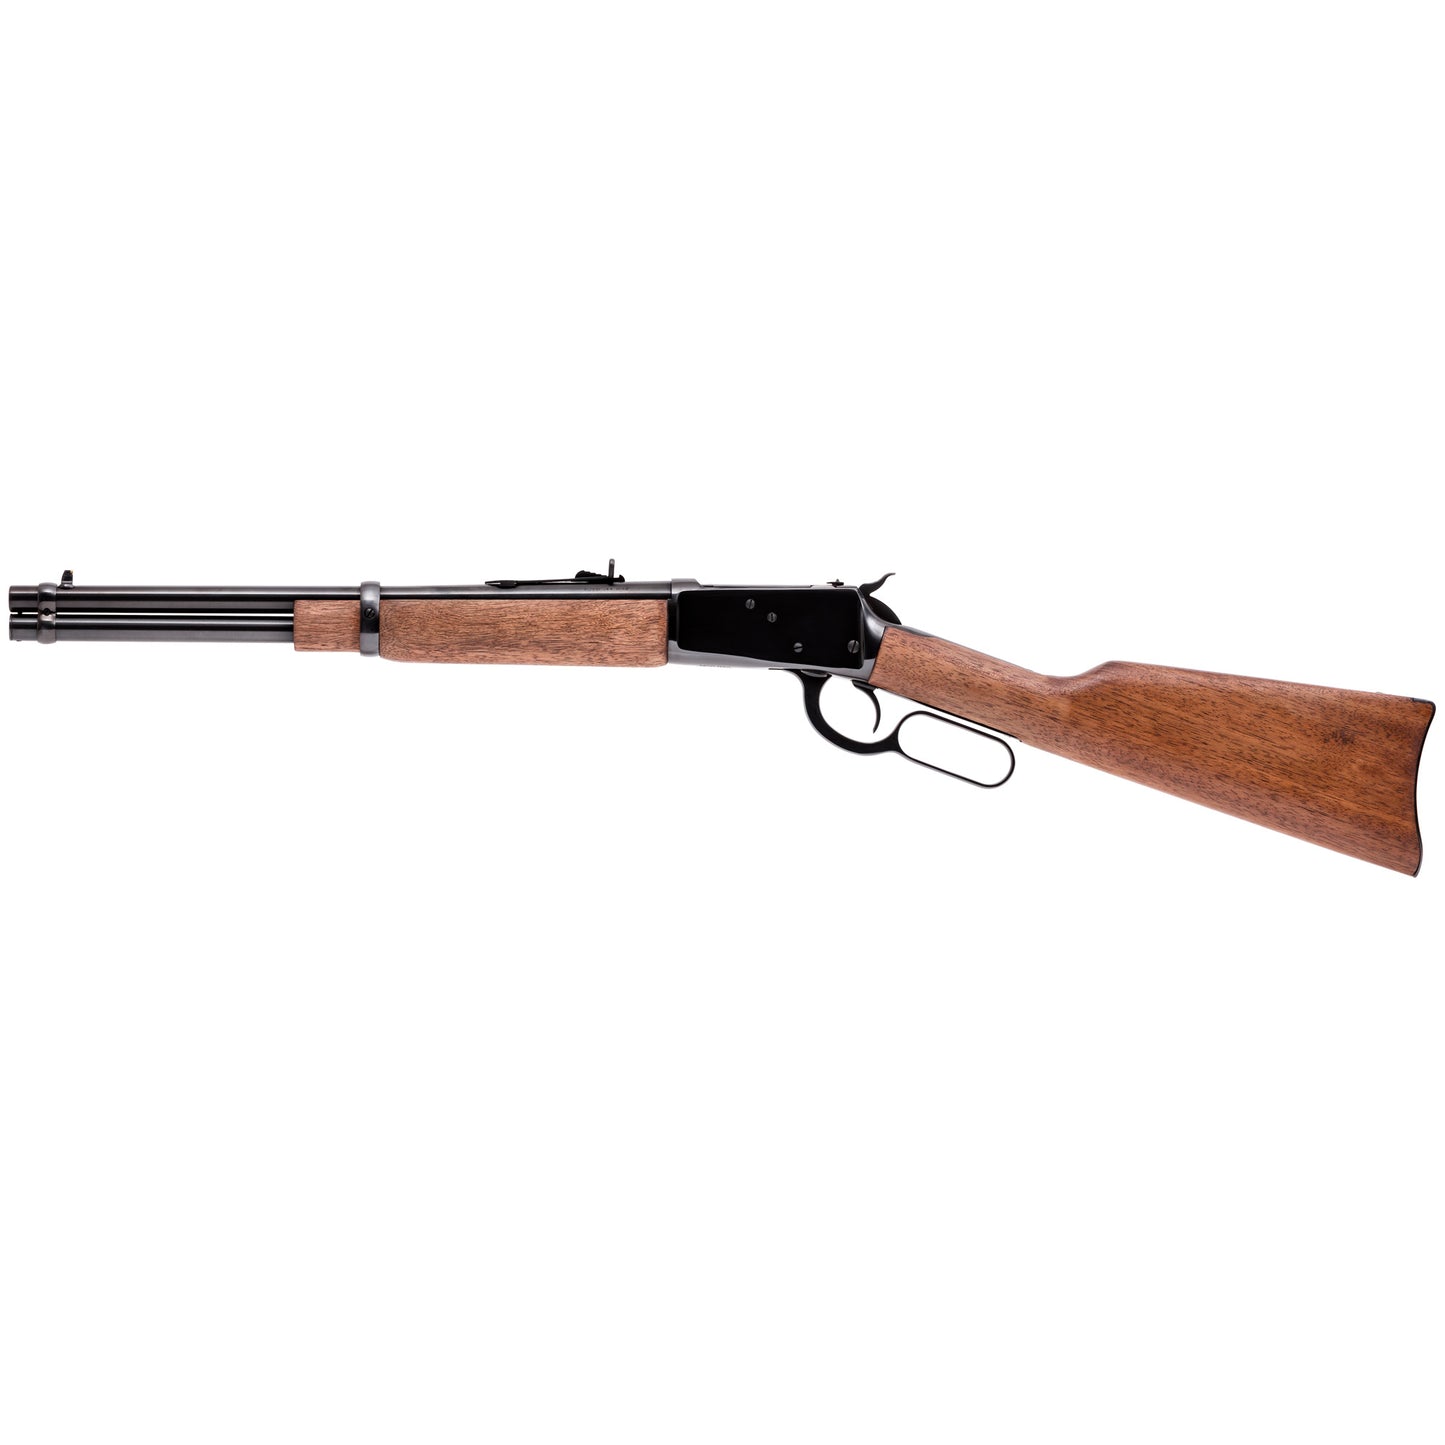 Rossi, R92, Lever Action Rifle, 44 Magnum, 16" Round Barrel, Blued Finish, Wood Stock, Adjustable Sights, 8 Rounds